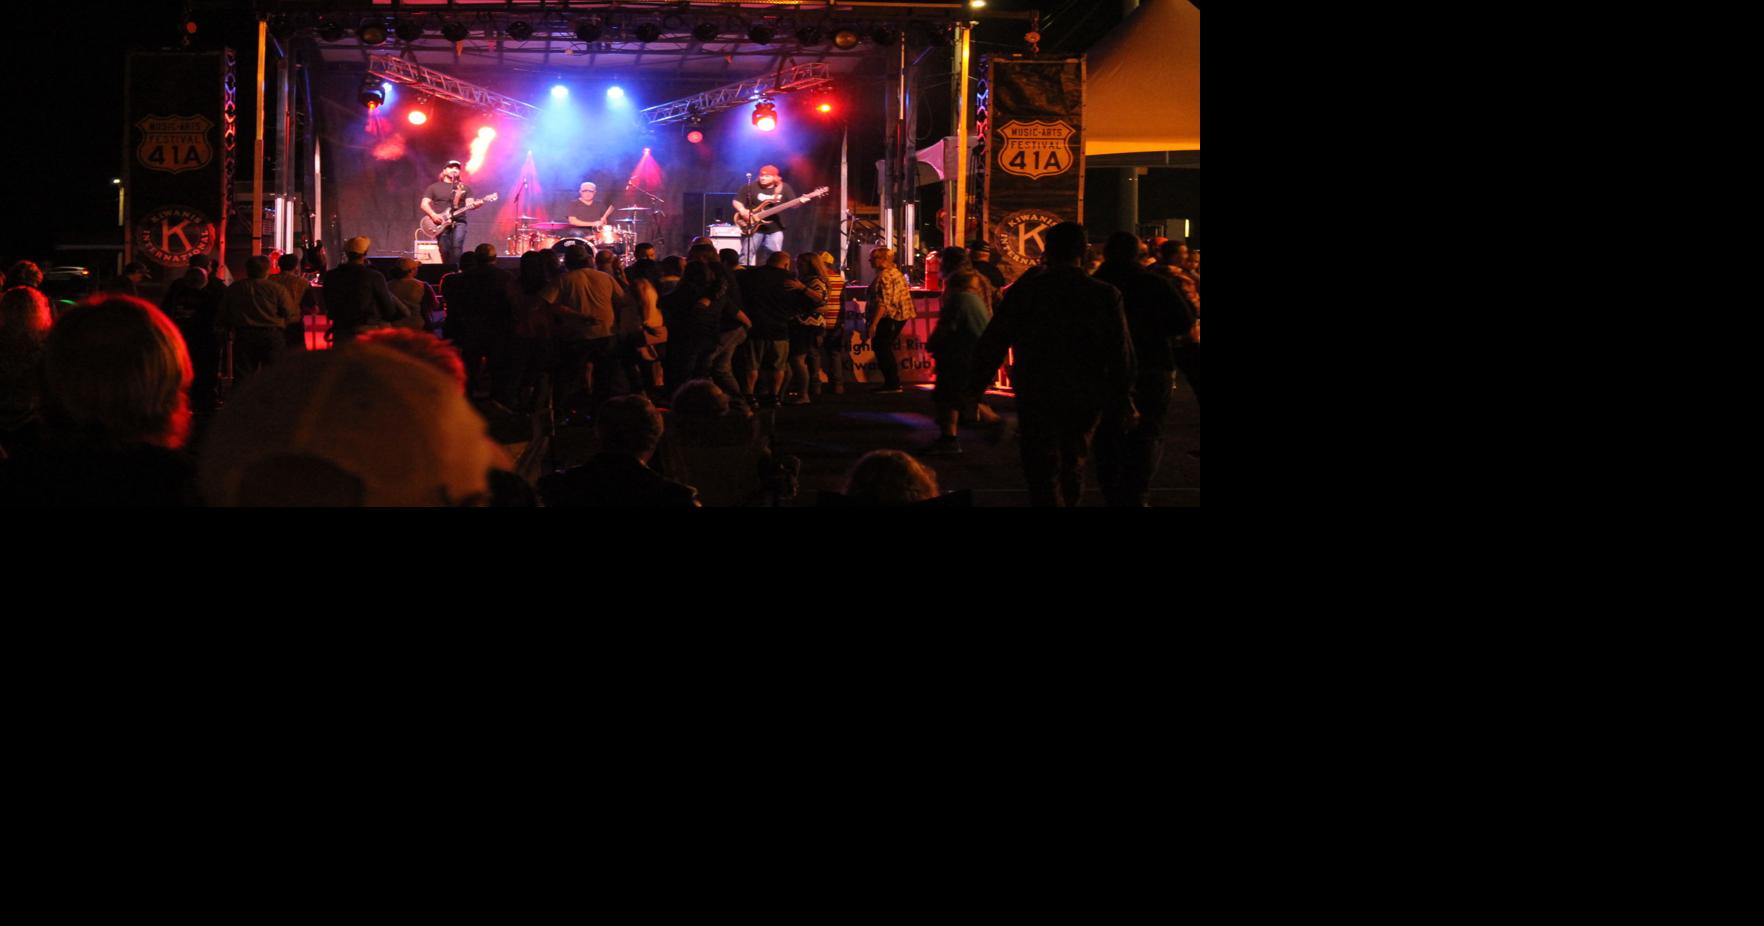 41A Music Festival takes over town this weekend Local News